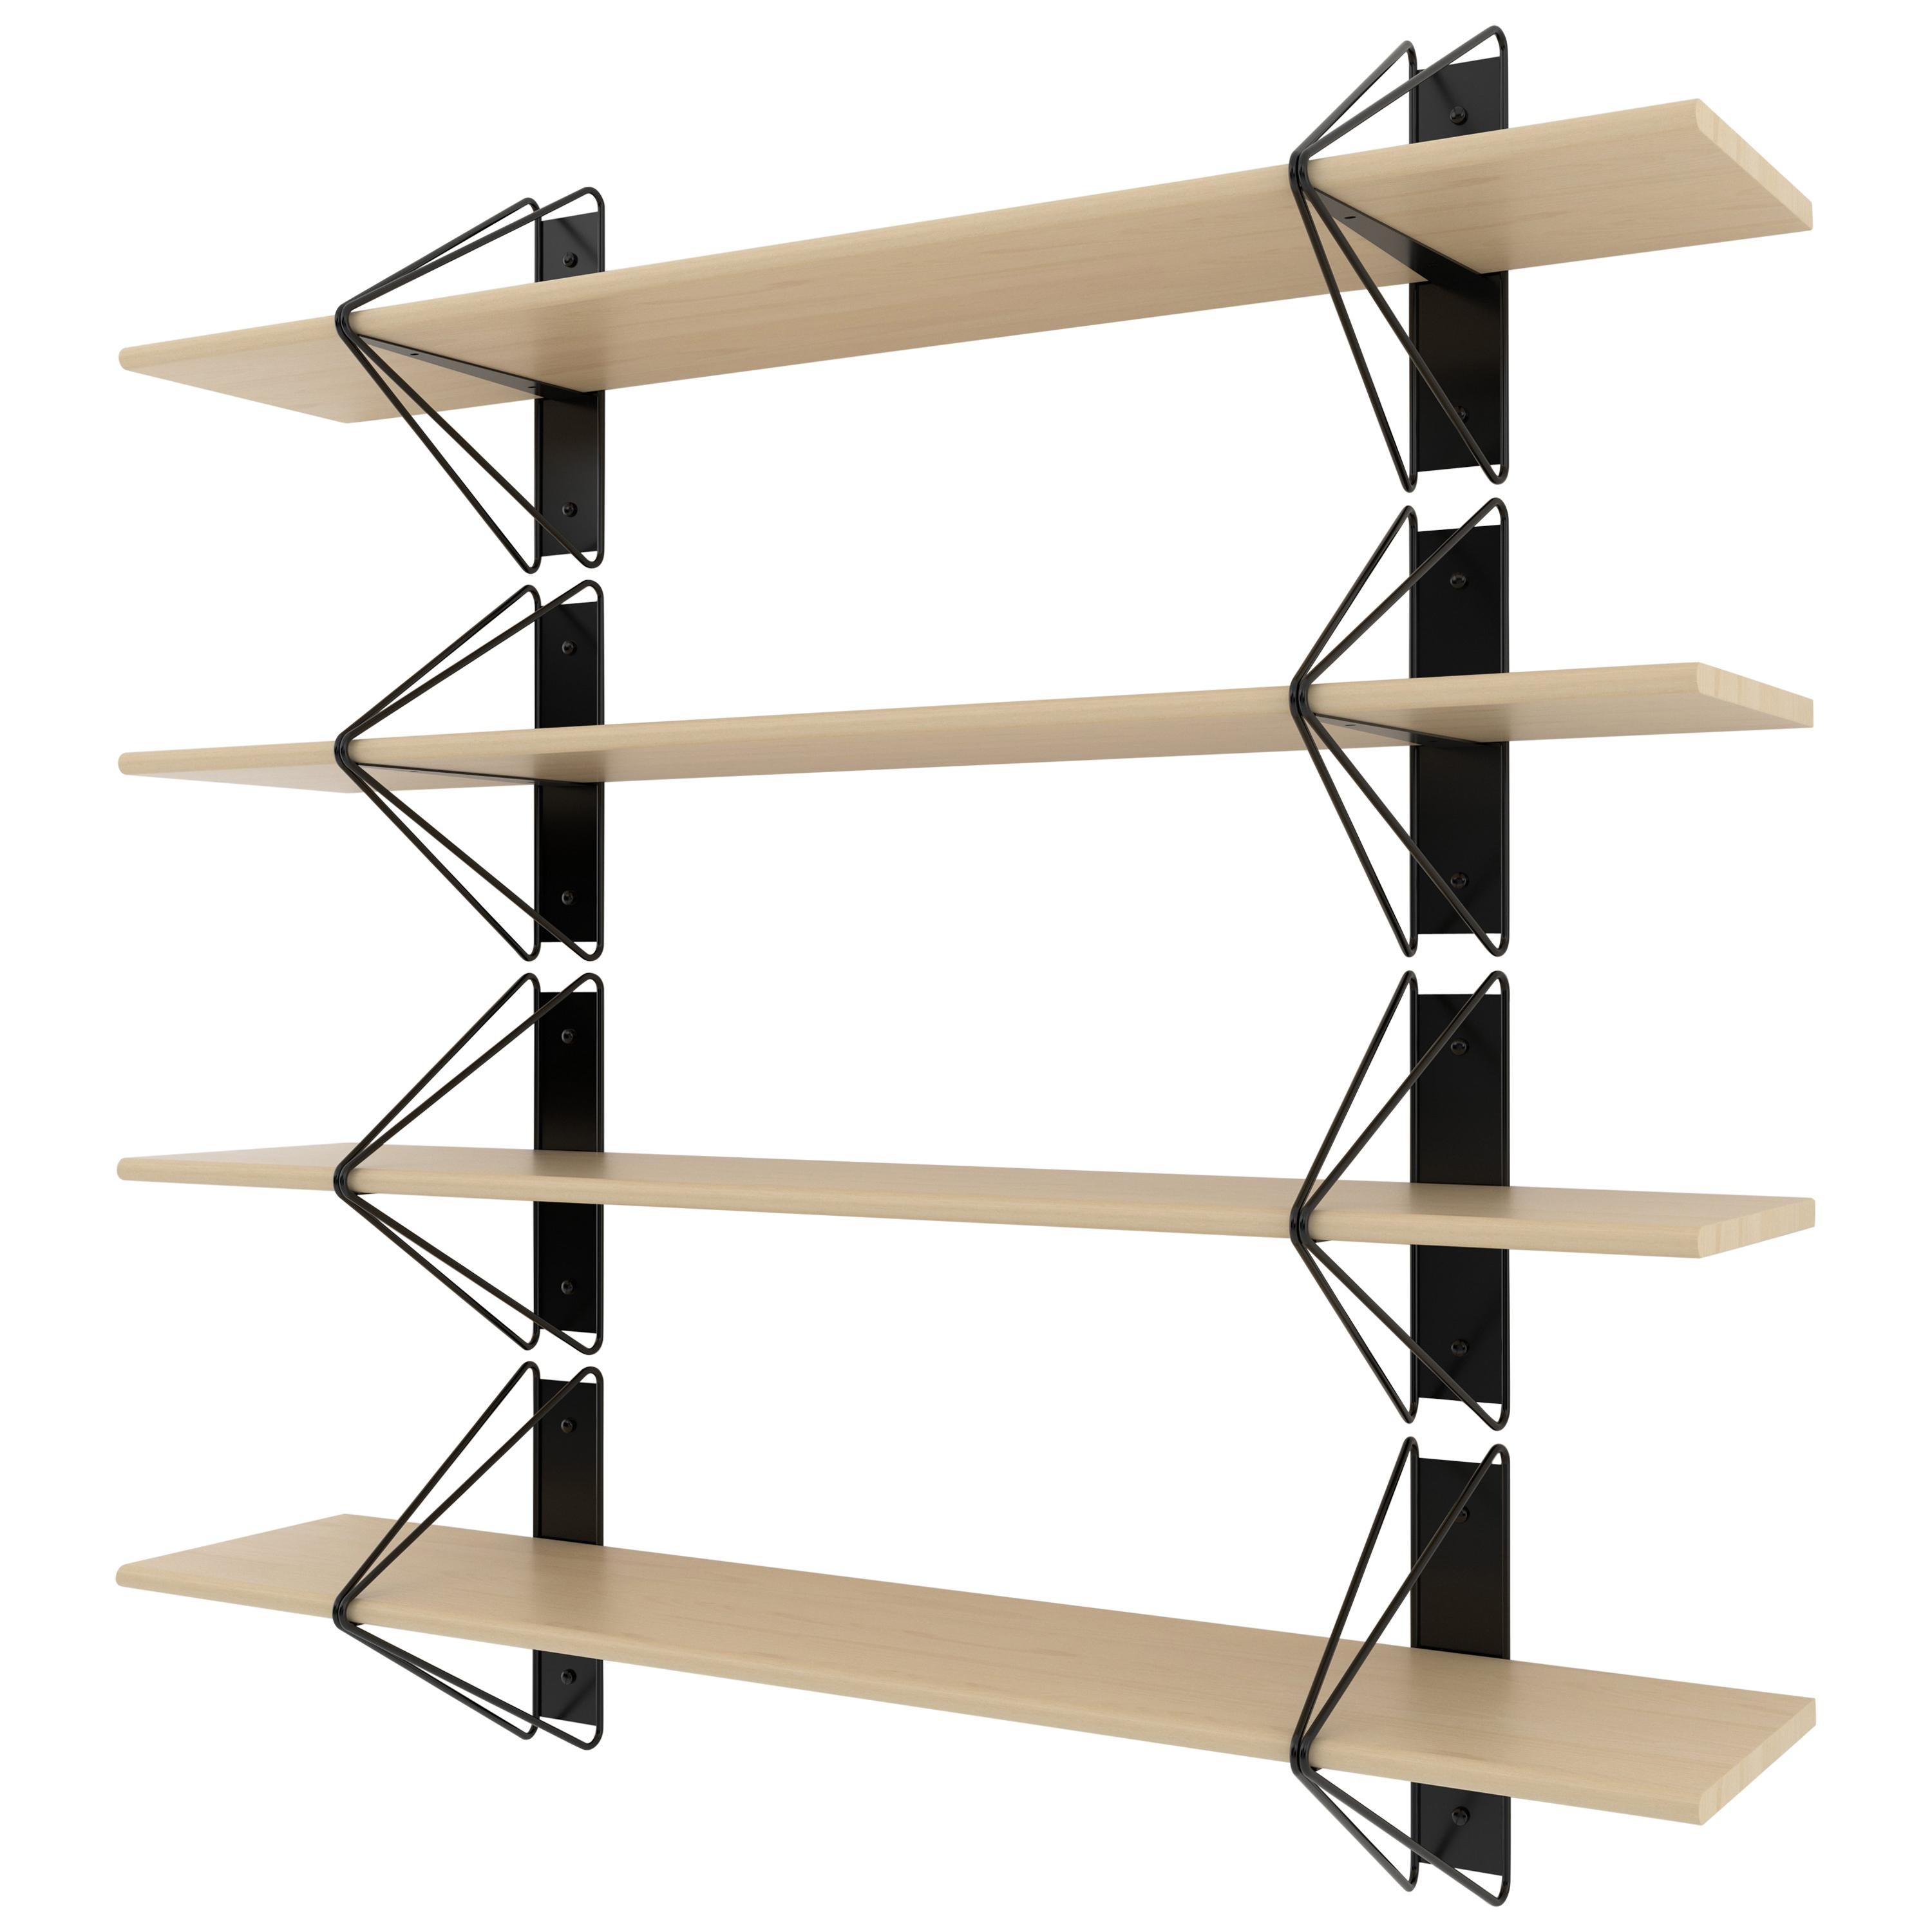 American Set of 2 Strut Shelves from Souda, White, Made to Order For Sale